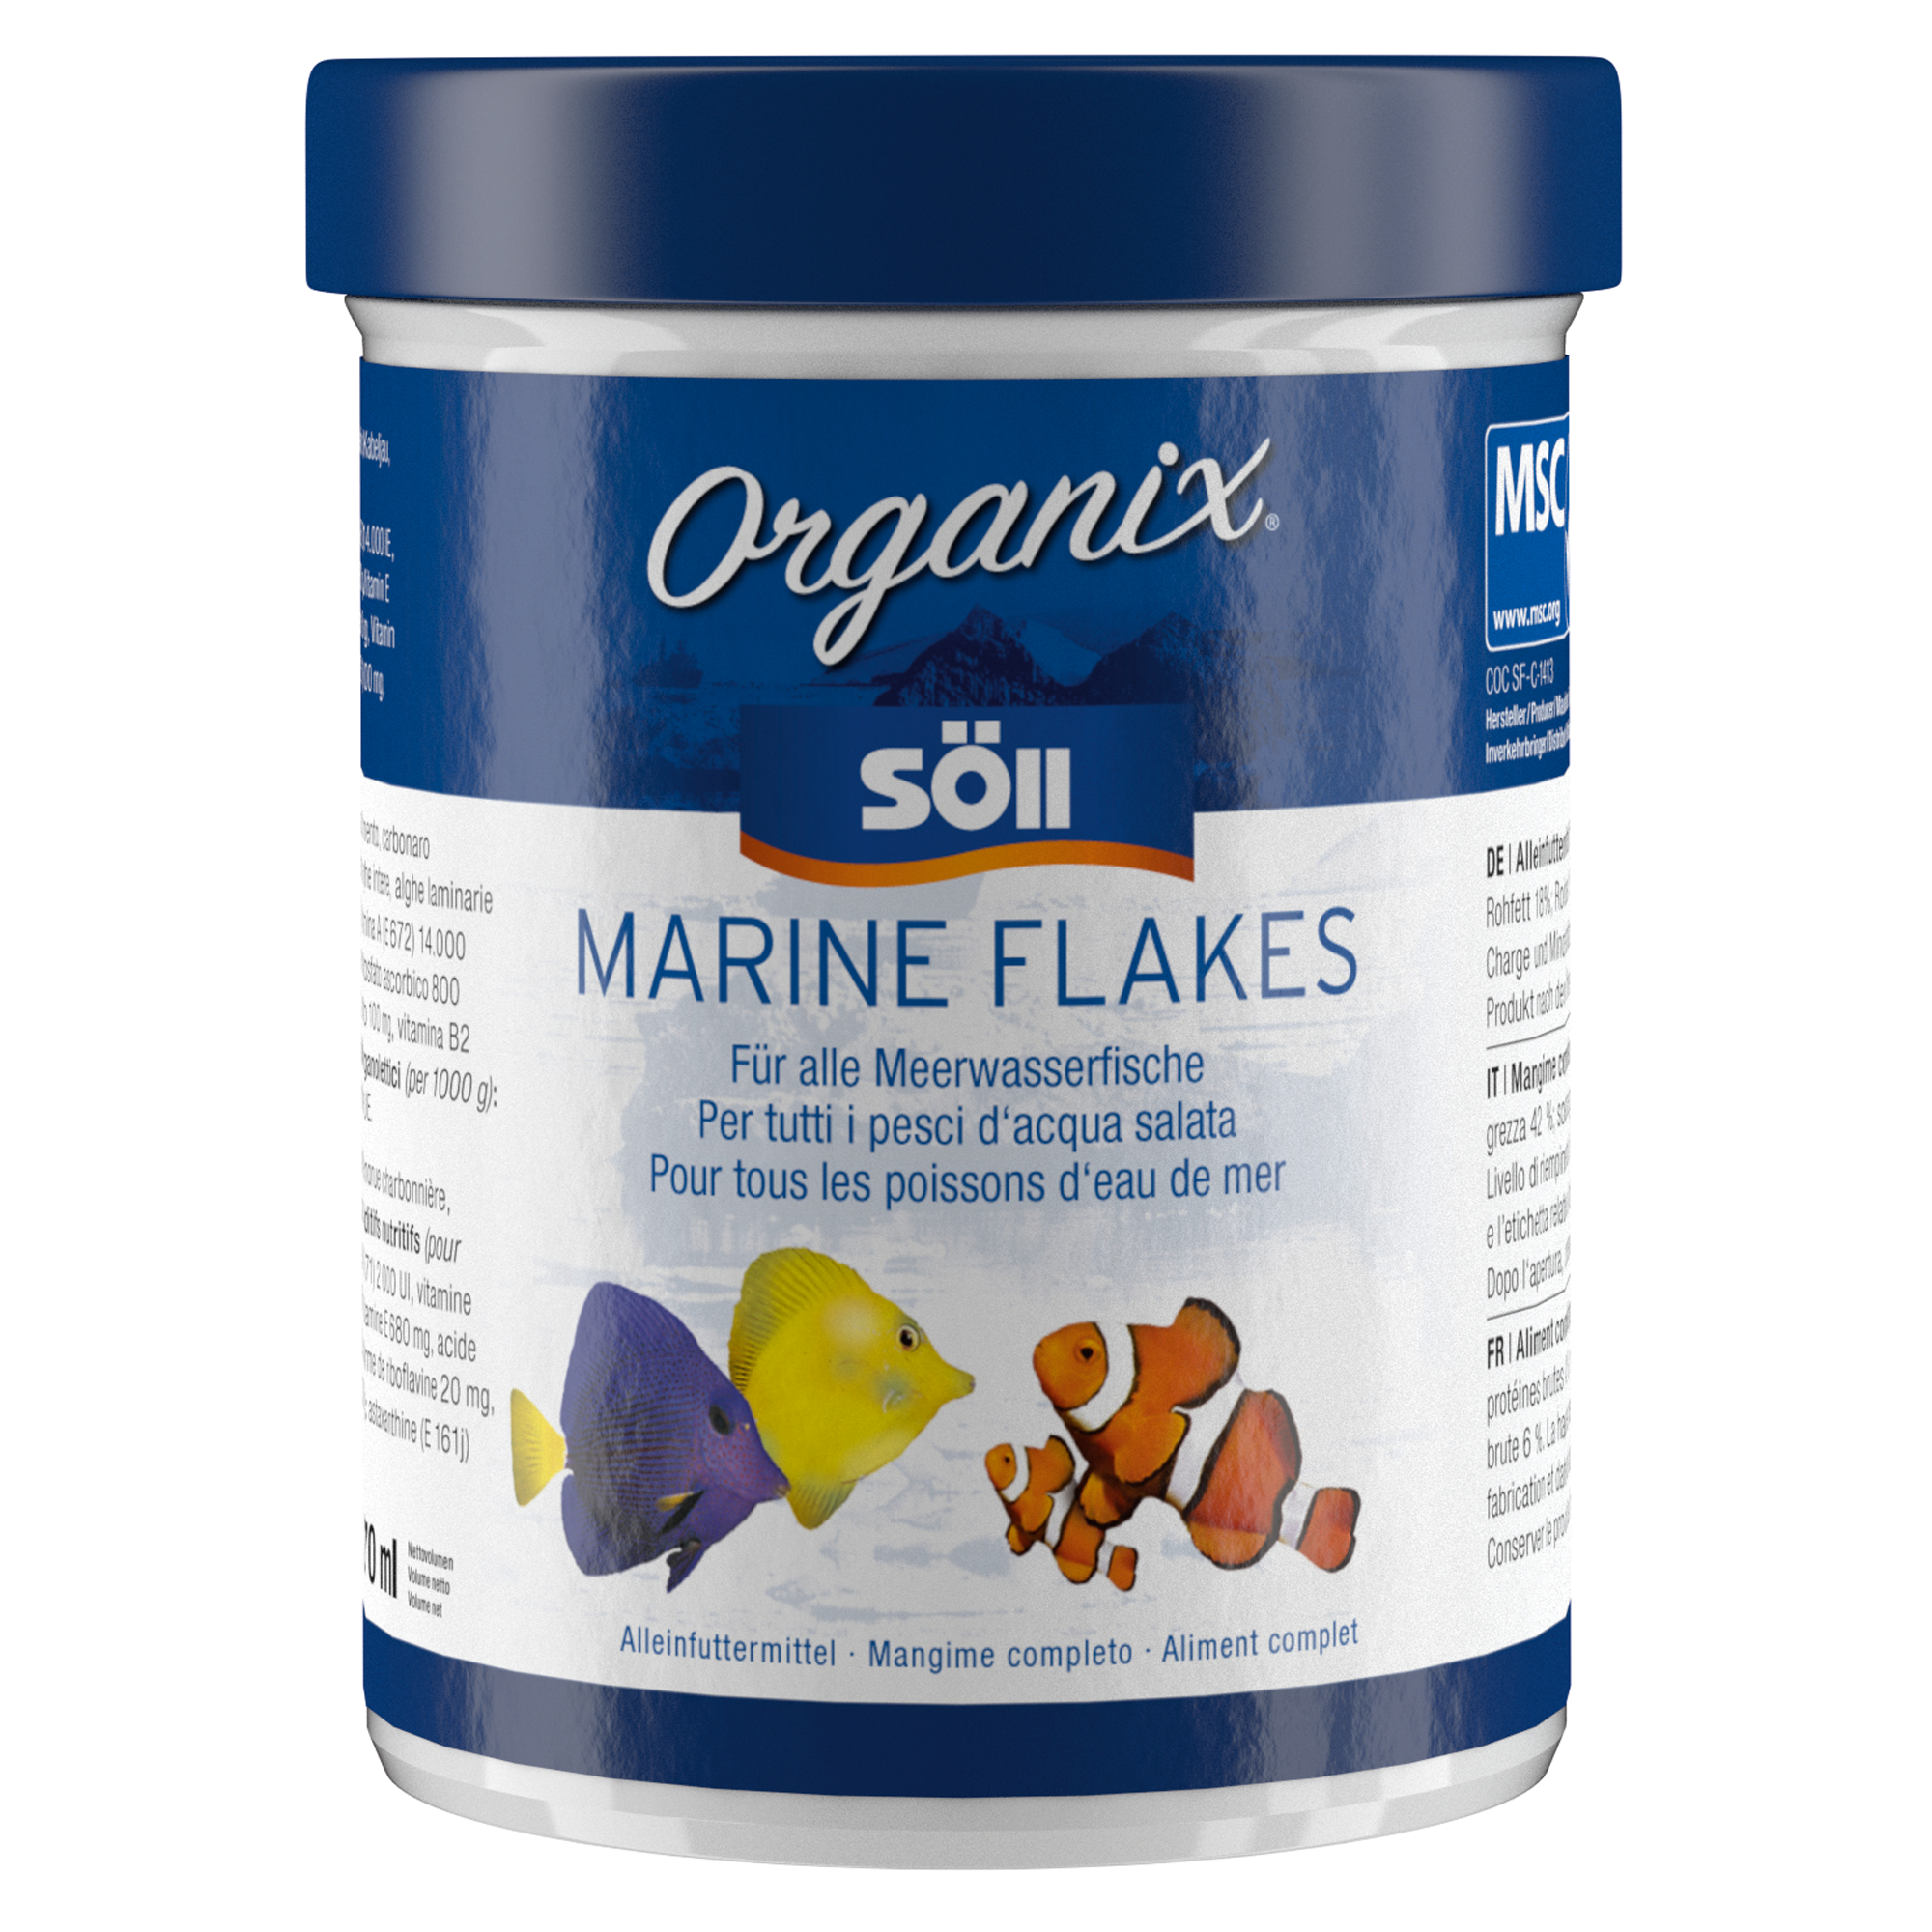 Organix Marine Flakes 270 ml + product picture